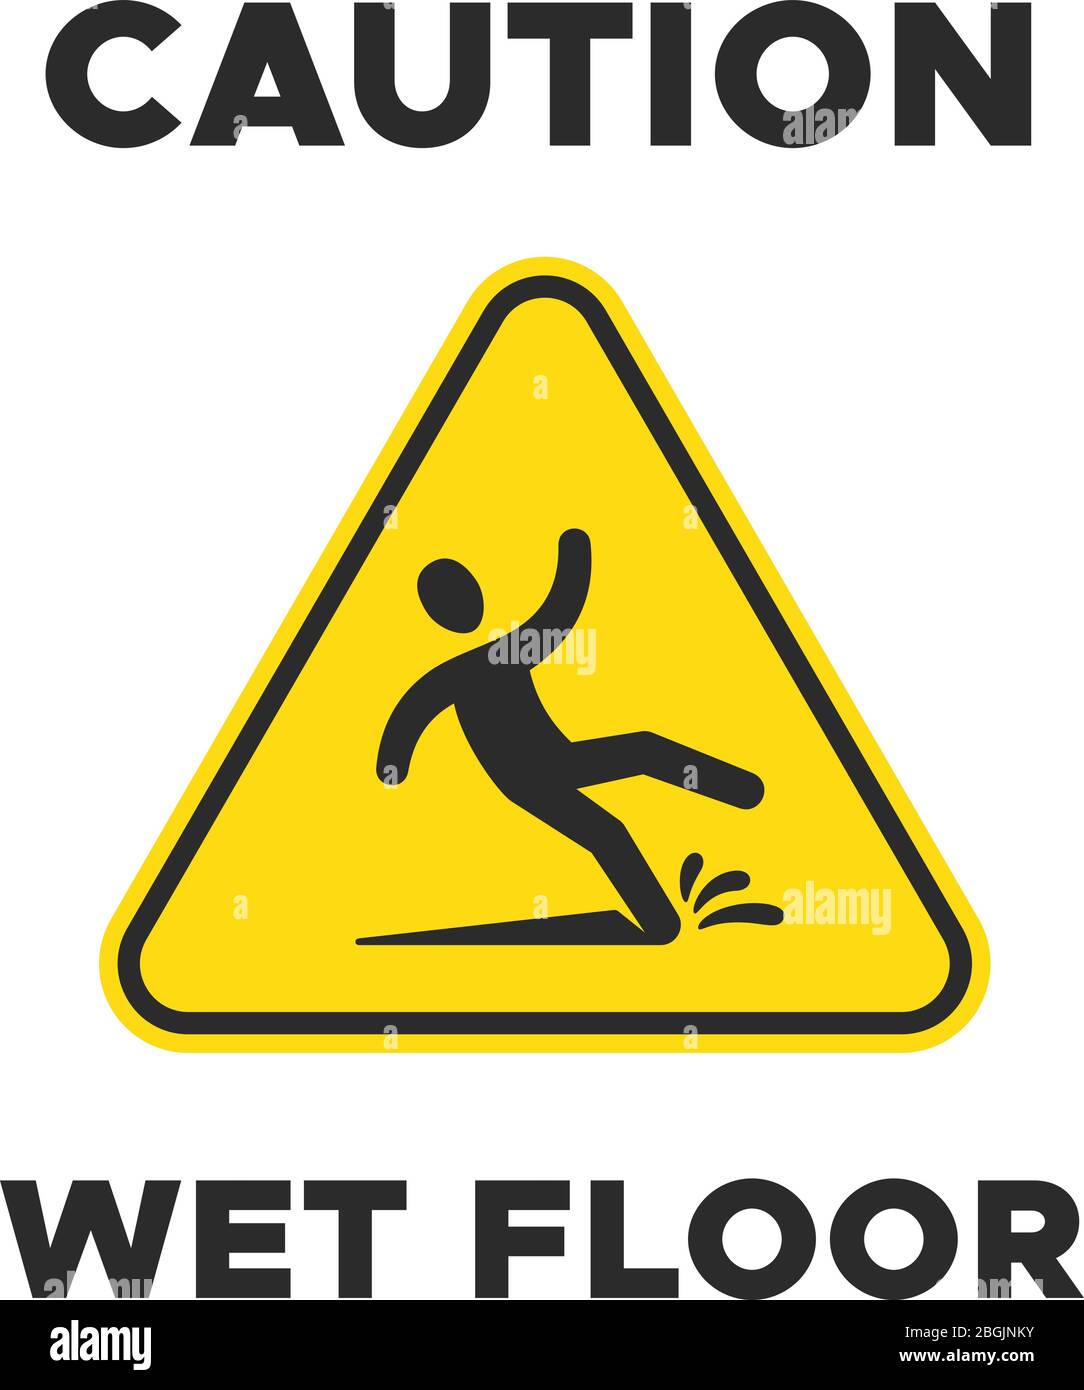 Wet floor yellow sign with falling person pictogram. Man slipping vector caution icon on whit background Stock Vector